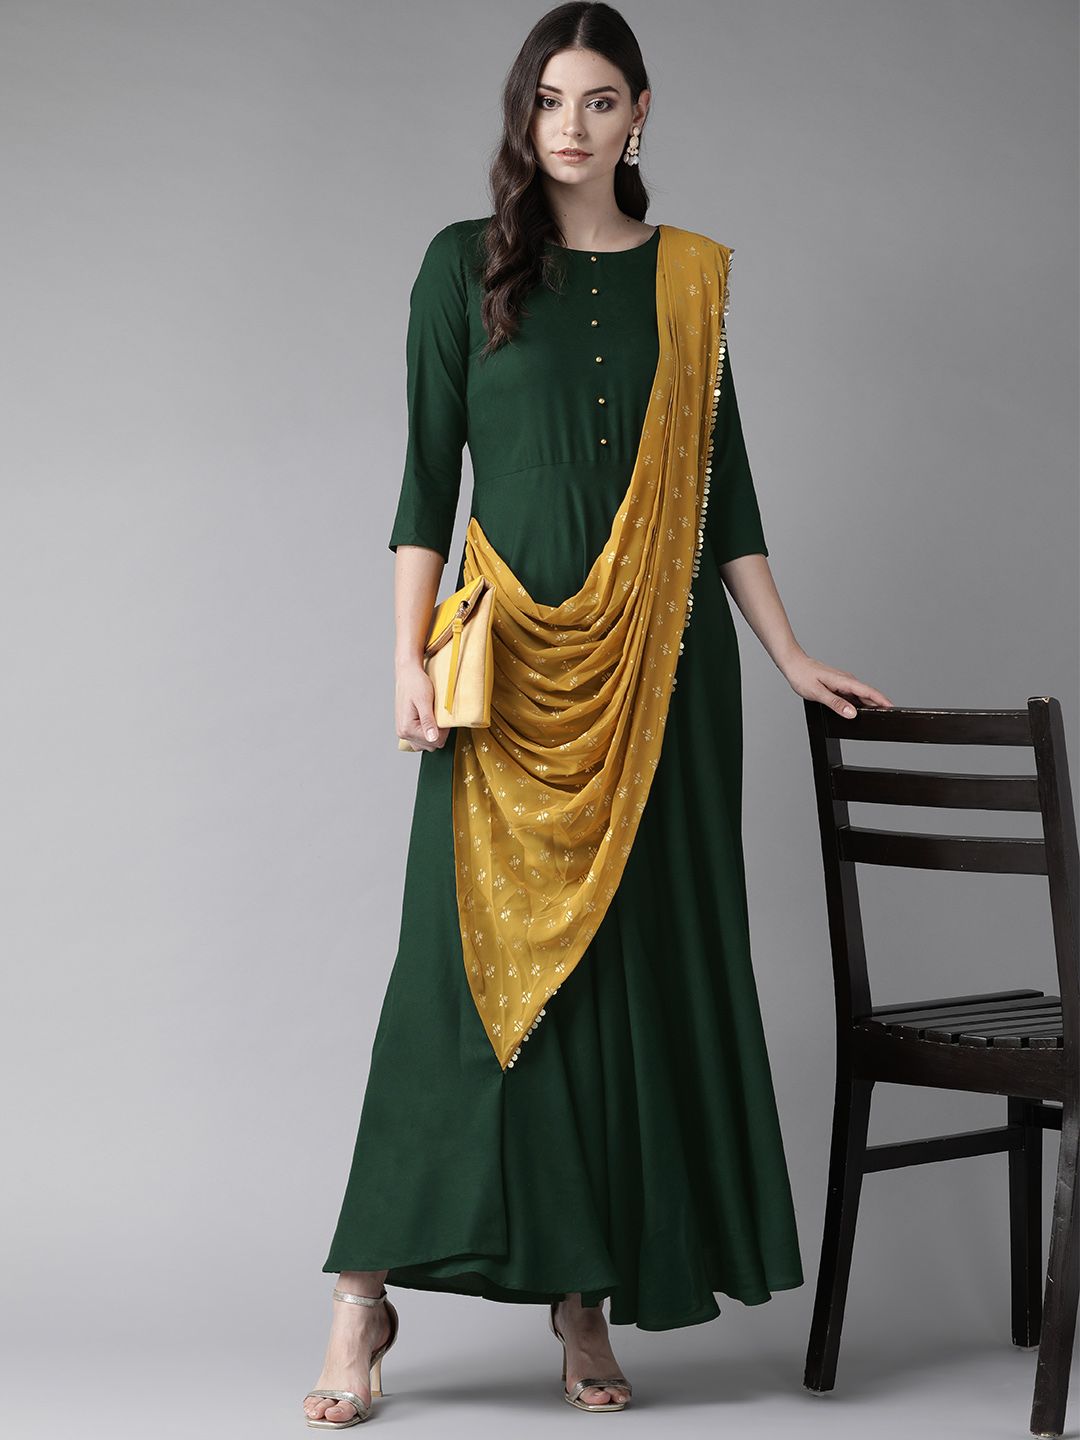 Ahalyaa Women Green & Mustard Yellow Solid Maxi Dress With Attached Dupatta Price in India